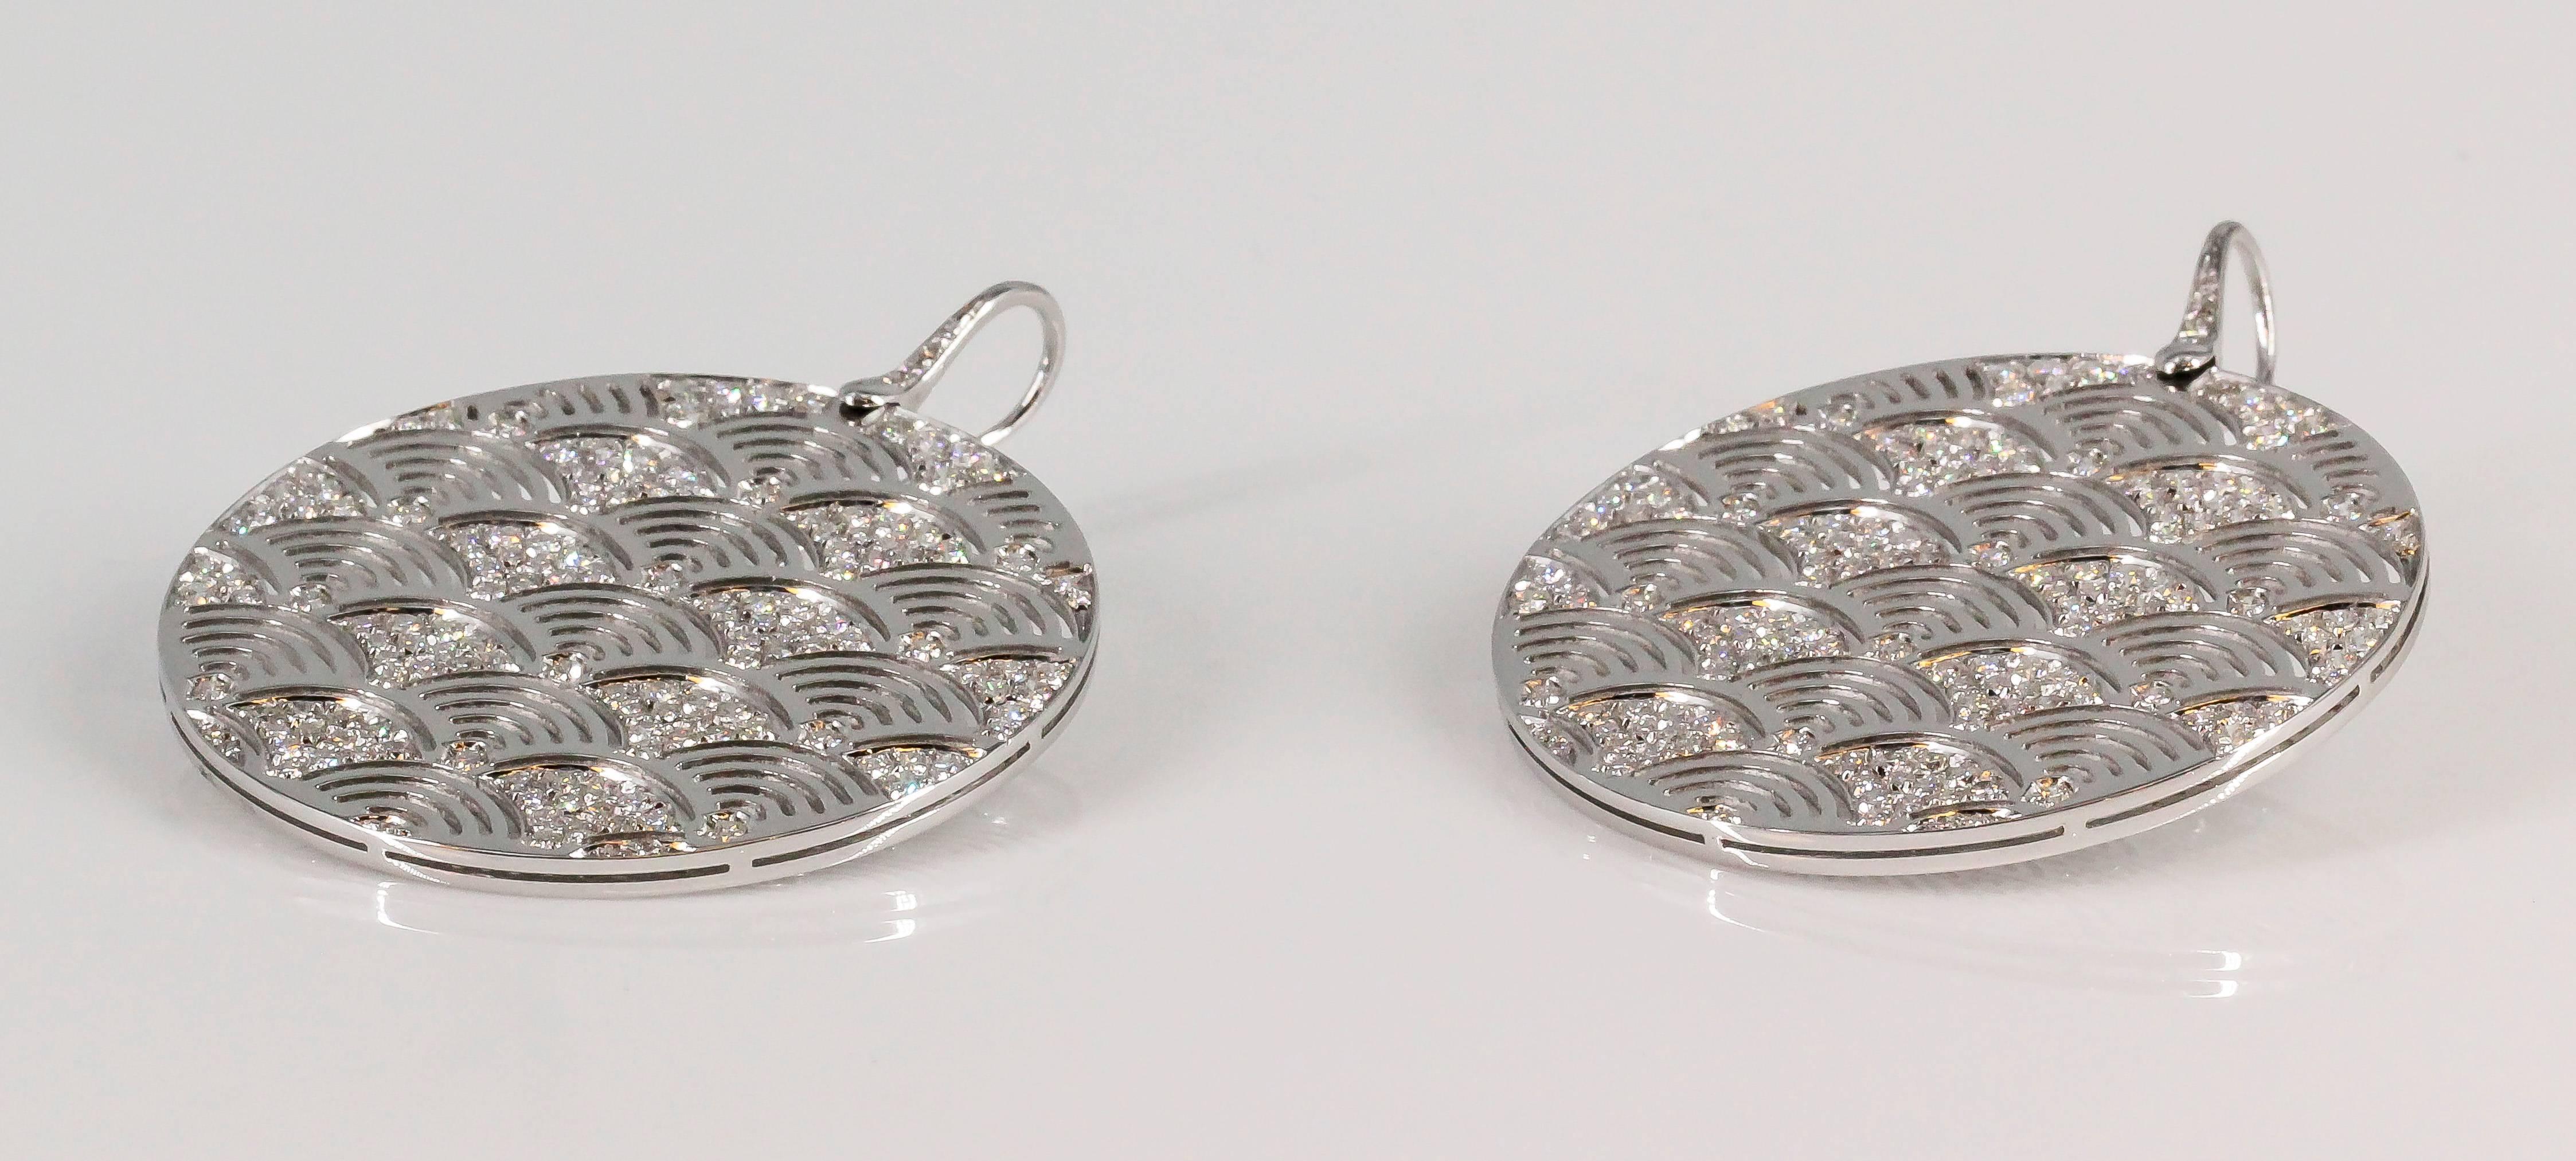 Stylish diamond and 18K white gold drop earrings by Enigma Gianni Bulgari. They resemble circular discs, with high grade round brilliant cut diamonds throughout, over a white gold setting. Diamond weight approx. 6 carats, original retail price